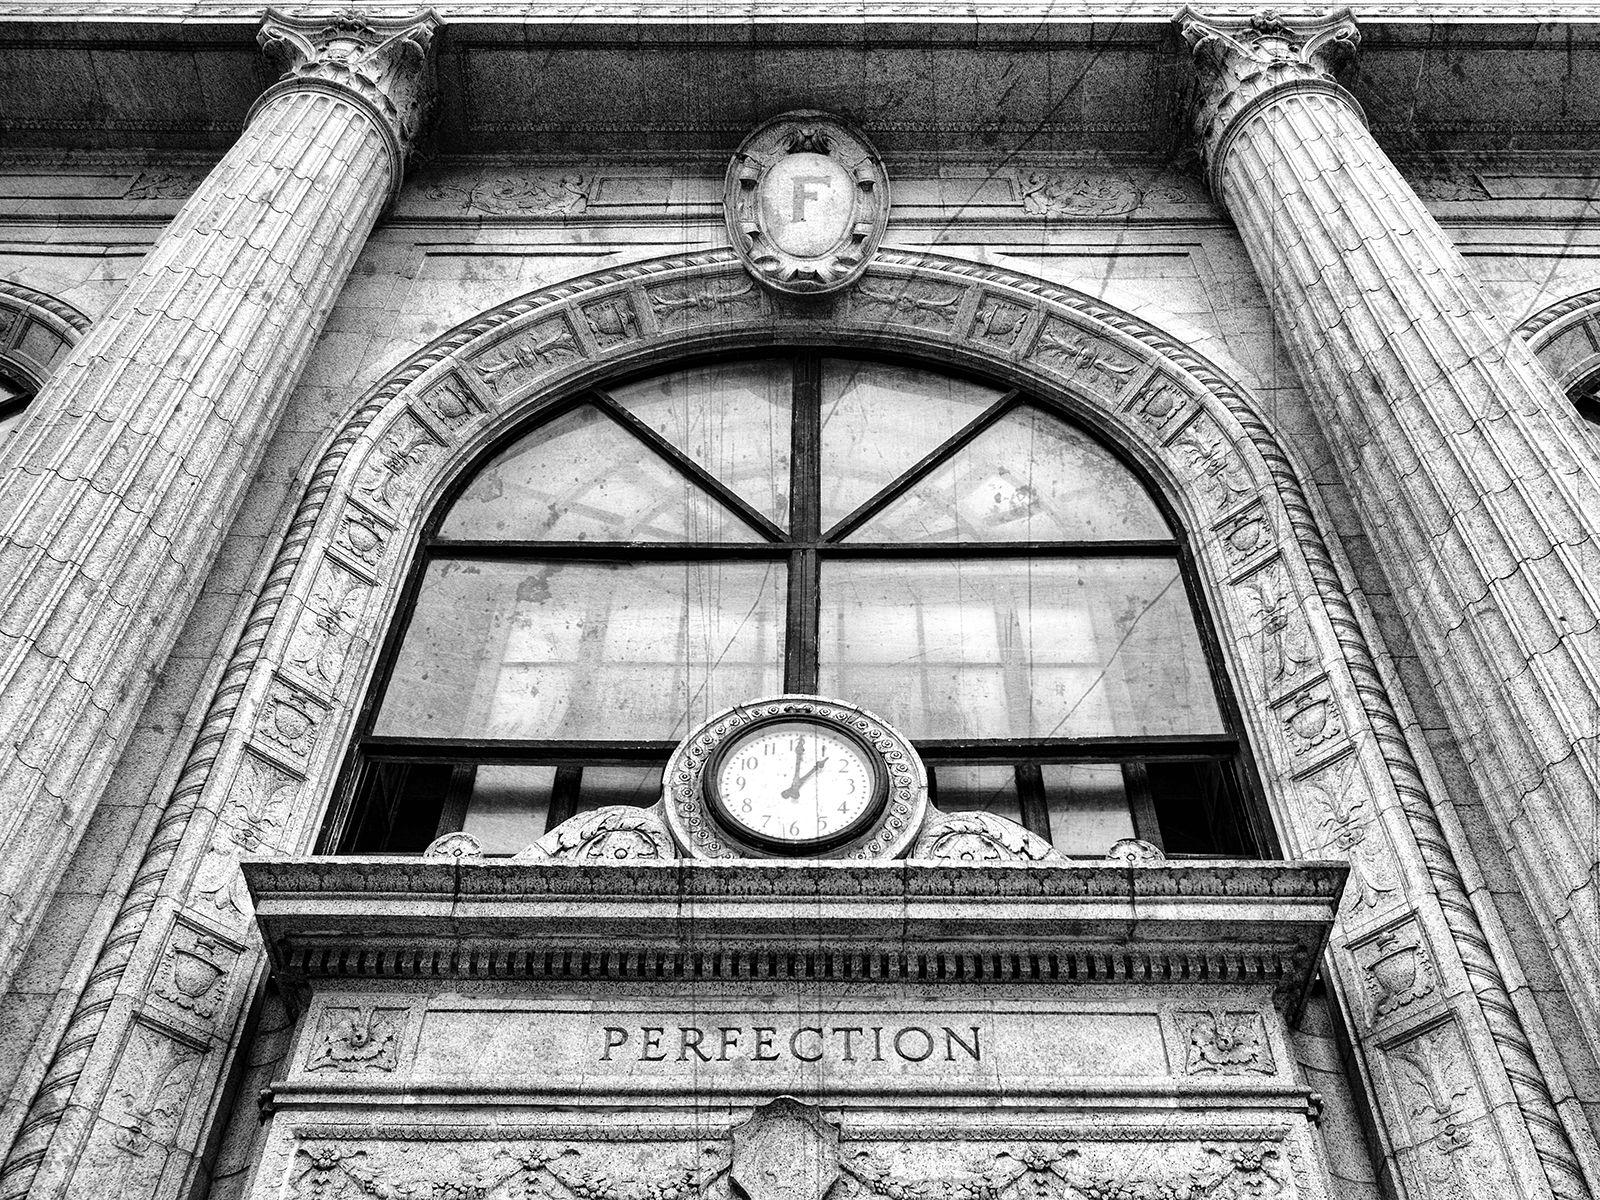 William Dey Black and White Photograph - PERFECT IMPERFECTION Chicago, Photograph, Archival Ink Jet